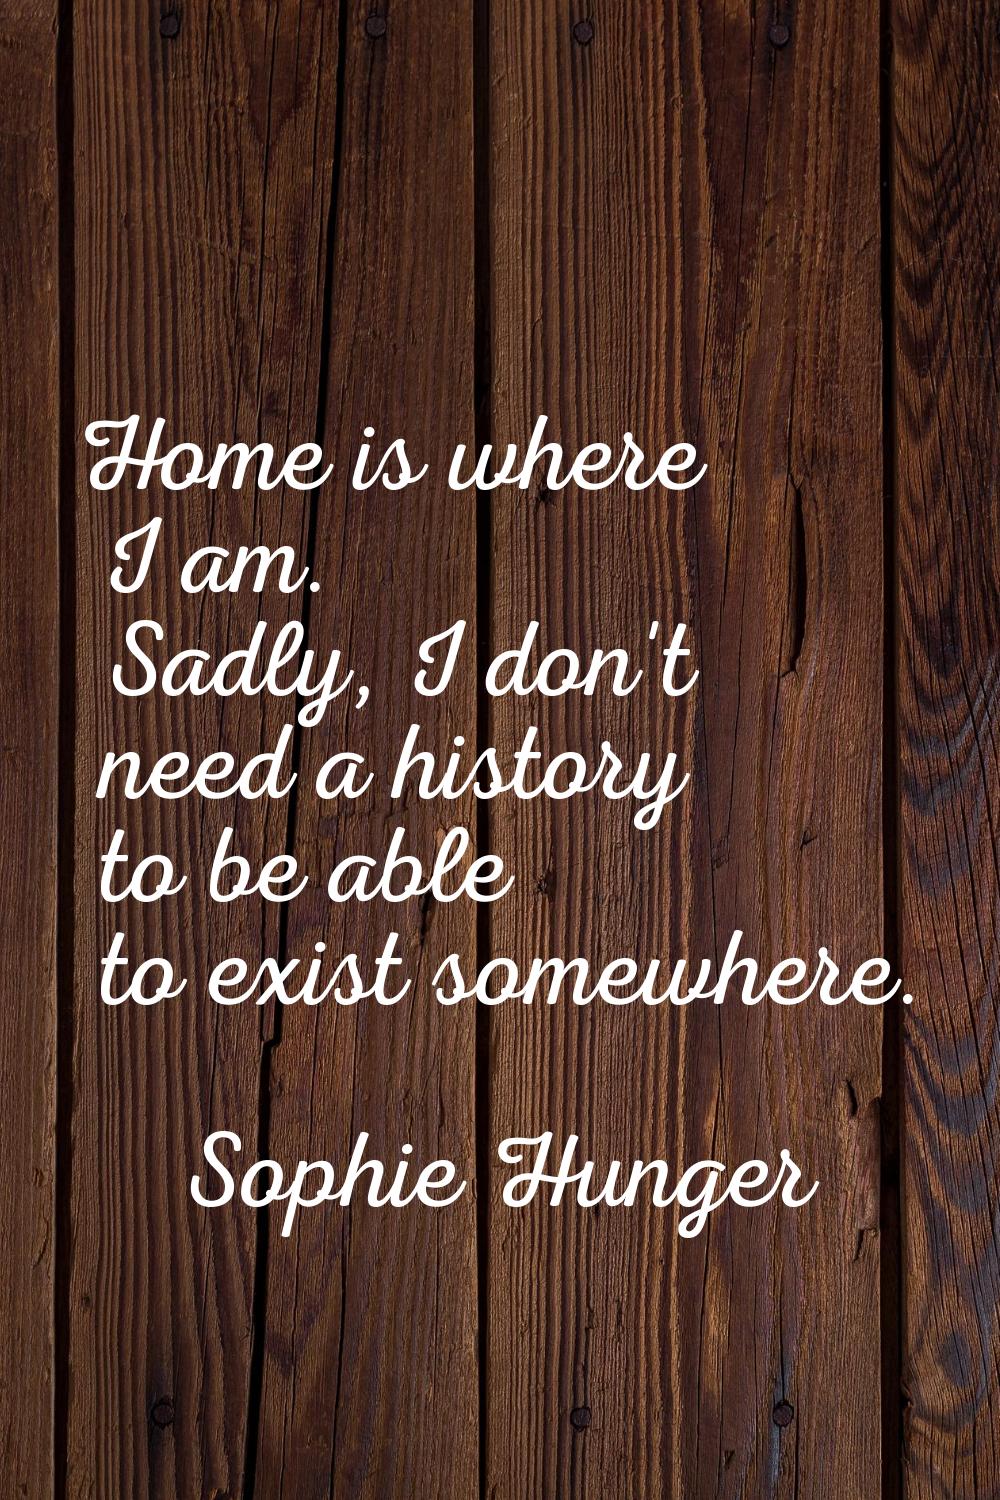 Home is where I am. Sadly, I don't need a history to be able to exist somewhere.